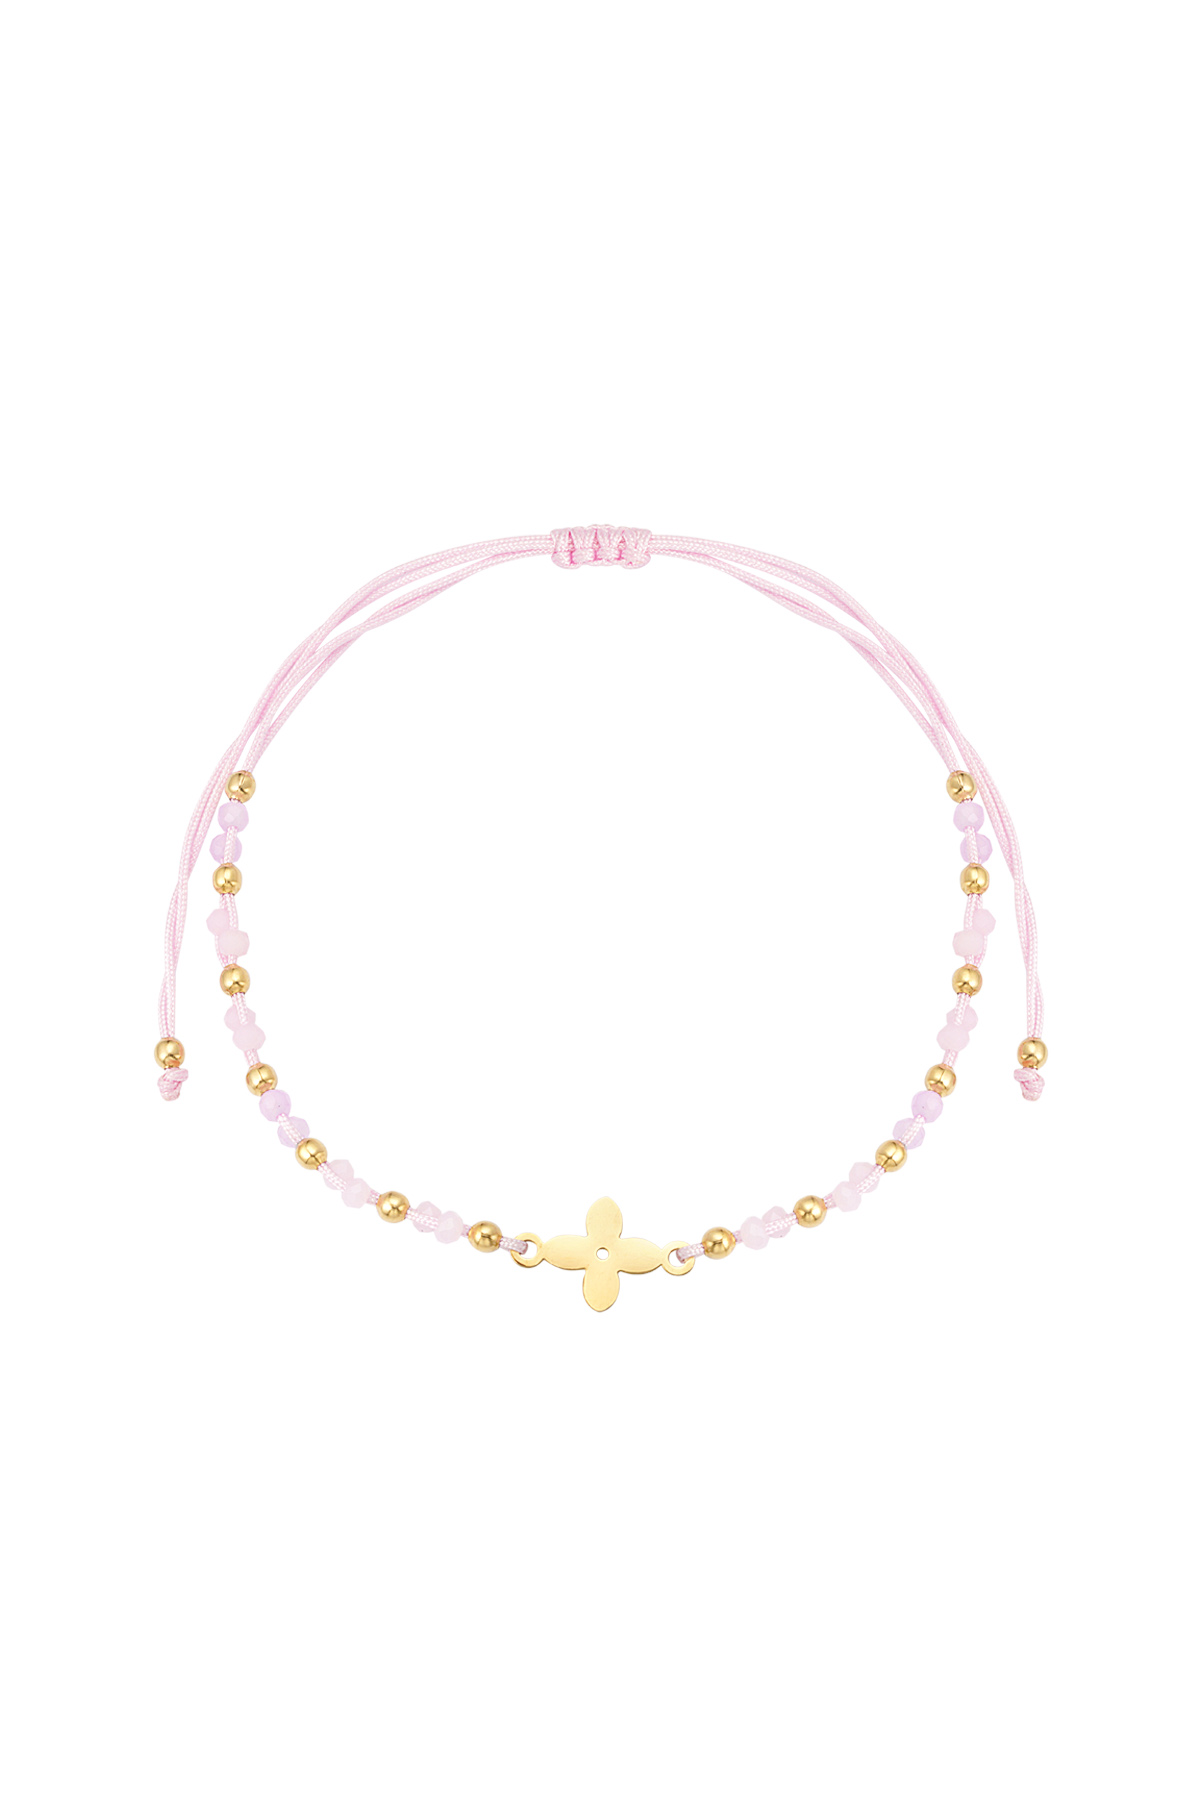 summer bracelet with beads - pink / gold